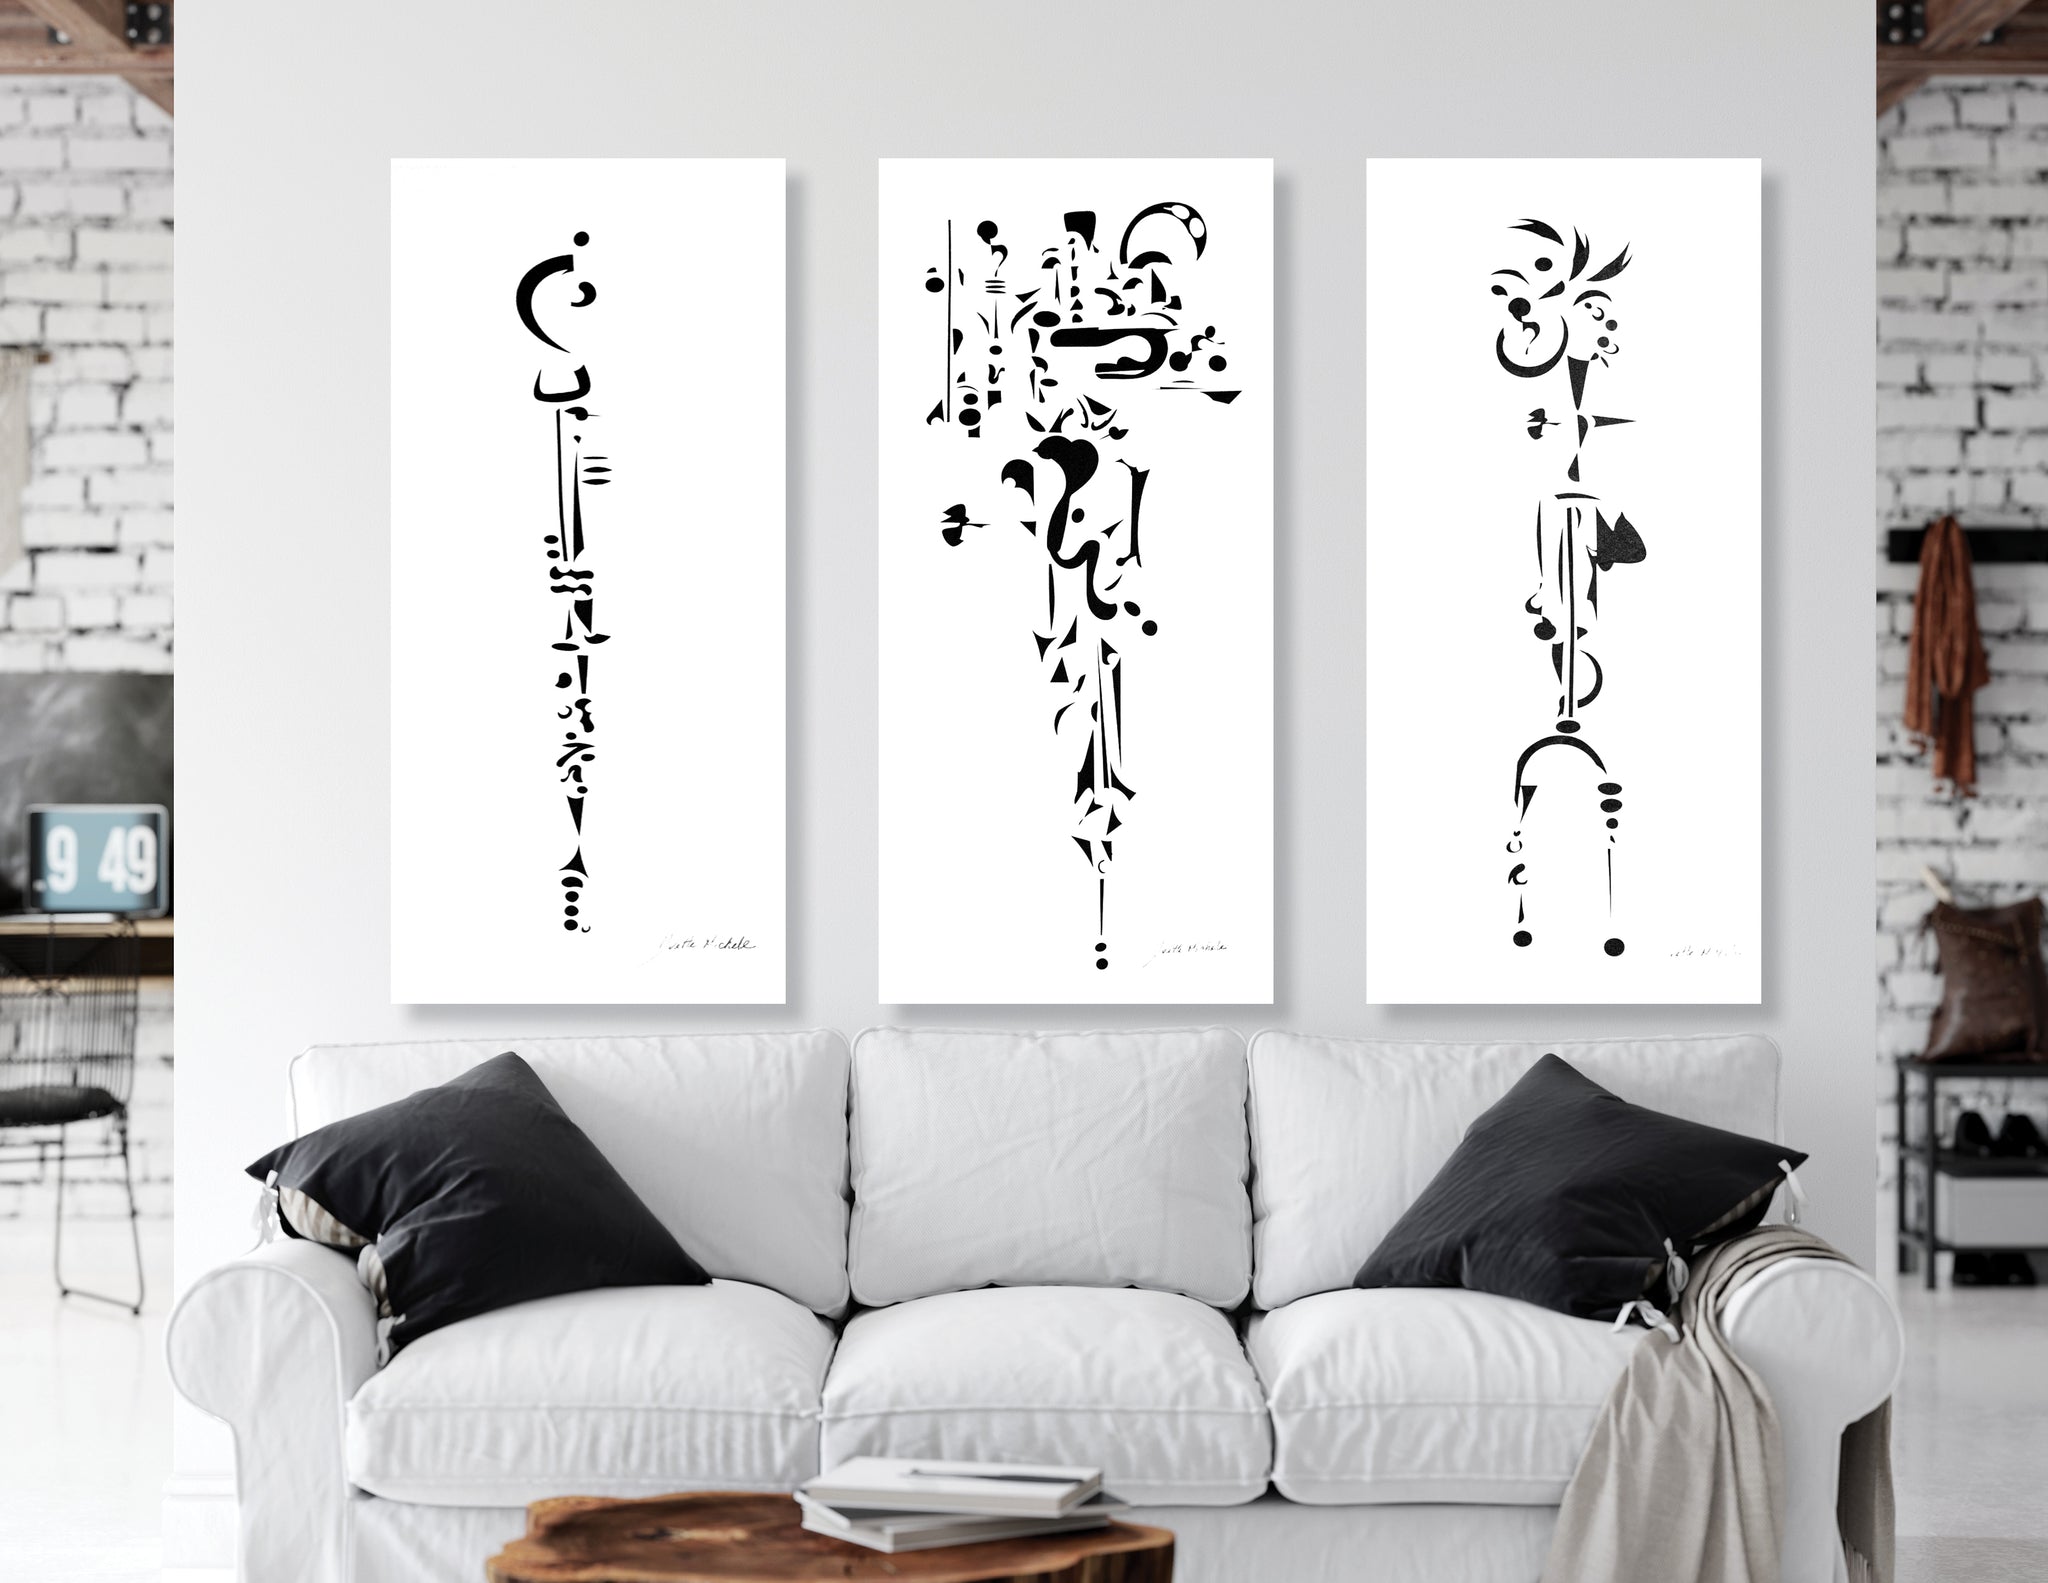 Sumerians in Silhouettes - AA2 Paradigms - Large Black and White abstract art 24 x48 - House of Yvette Michele 